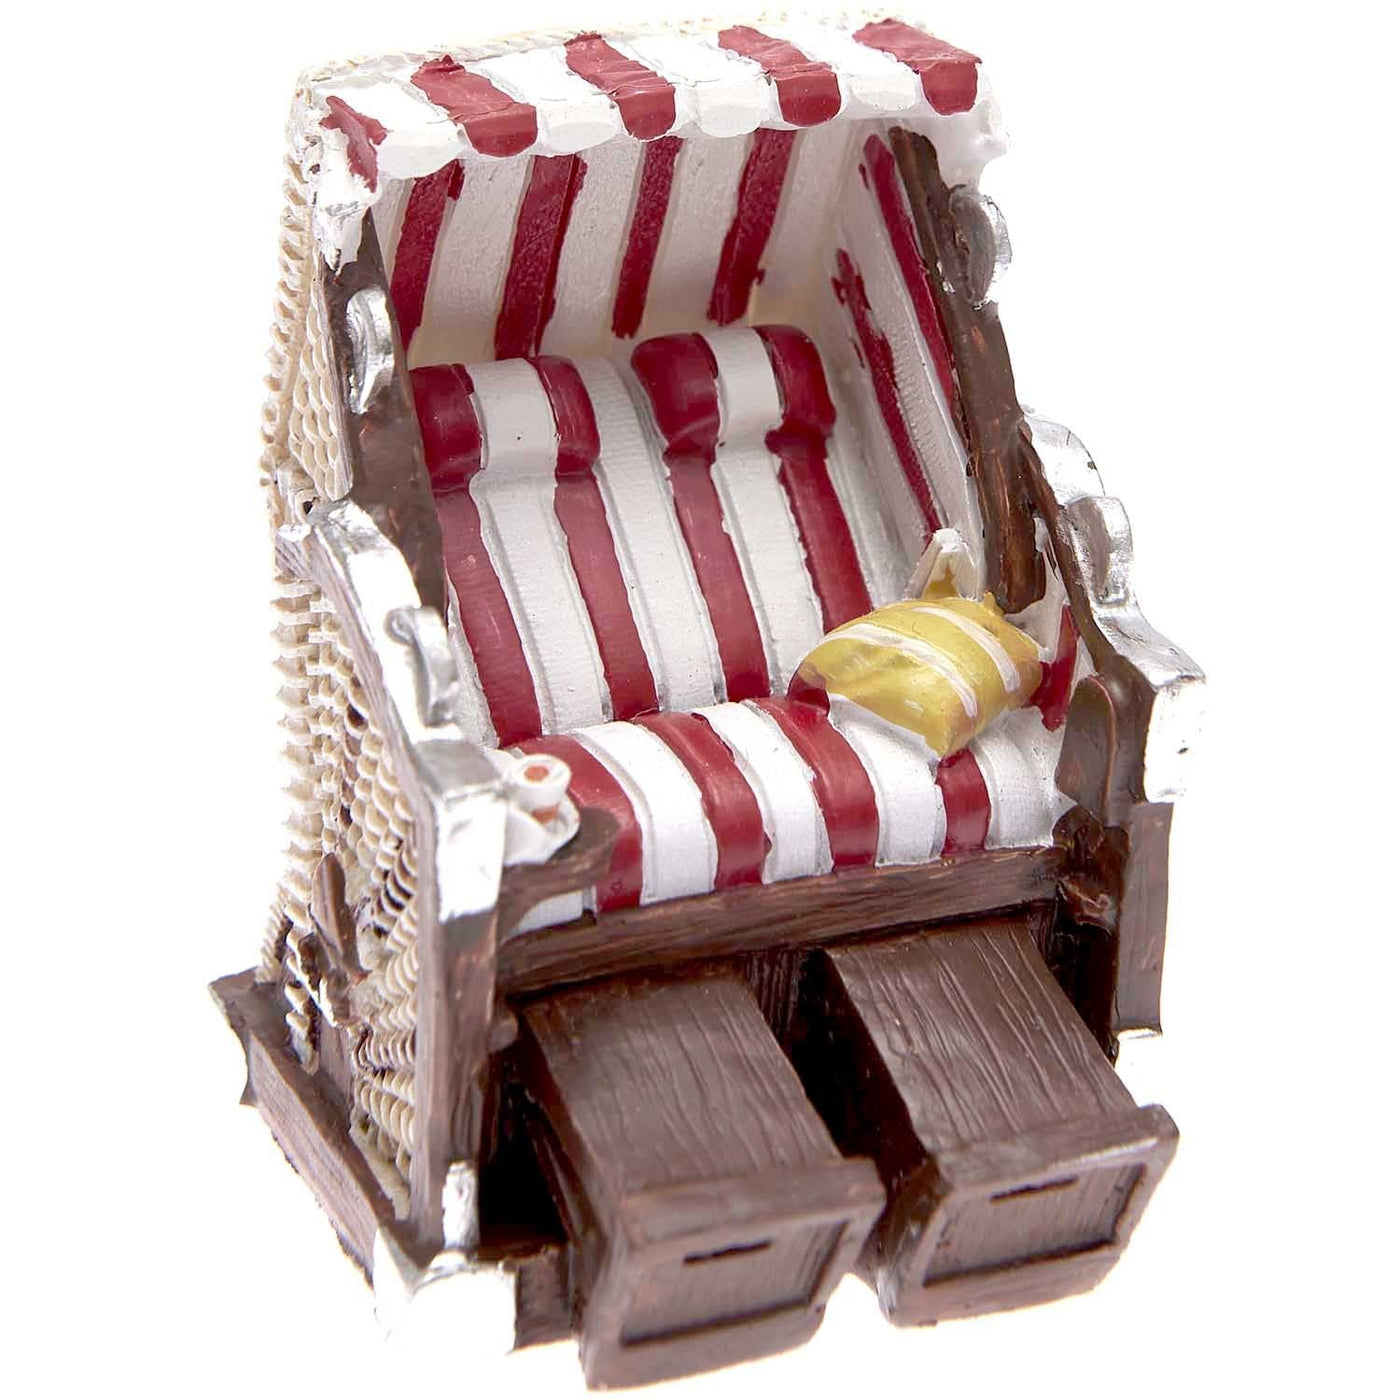 Decorative Beach Chair for Crafts - 6.5cm - Red & White